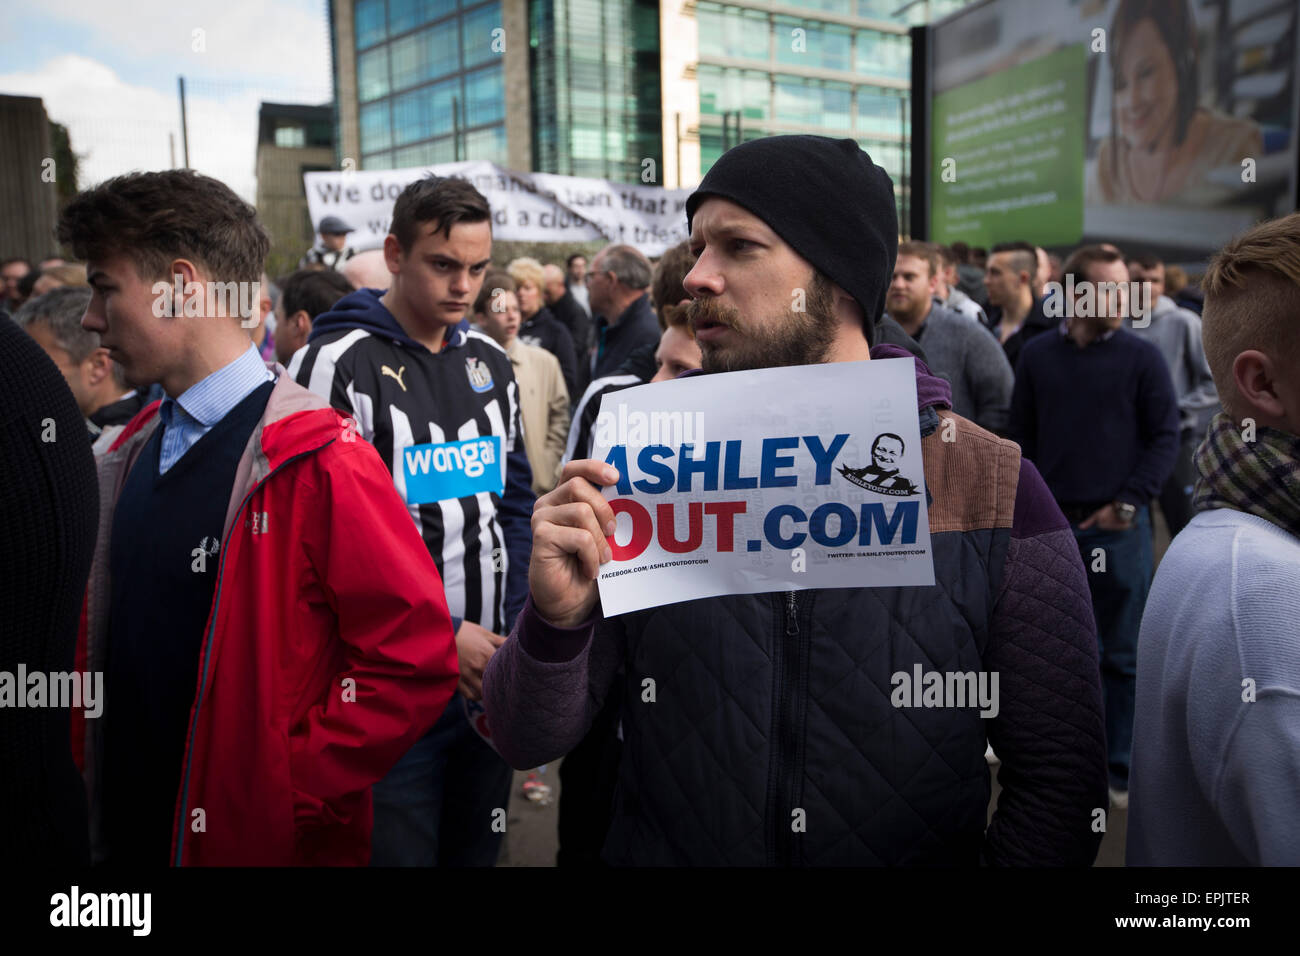 A protester holding a sign during a demonstration at the Gallowgate end of the stadium before Newcastle United host Tottenham Hotspurs in an English Premier League match at St. James' Park. The match was boycotted by a section of the home support critical of the role of owner Mike Ashley and sponsorship by a payday loan company. The match was won by Spurs by 3-1, watched by 47,427, the lowest league gate of the season at the stadium. Stock Photo